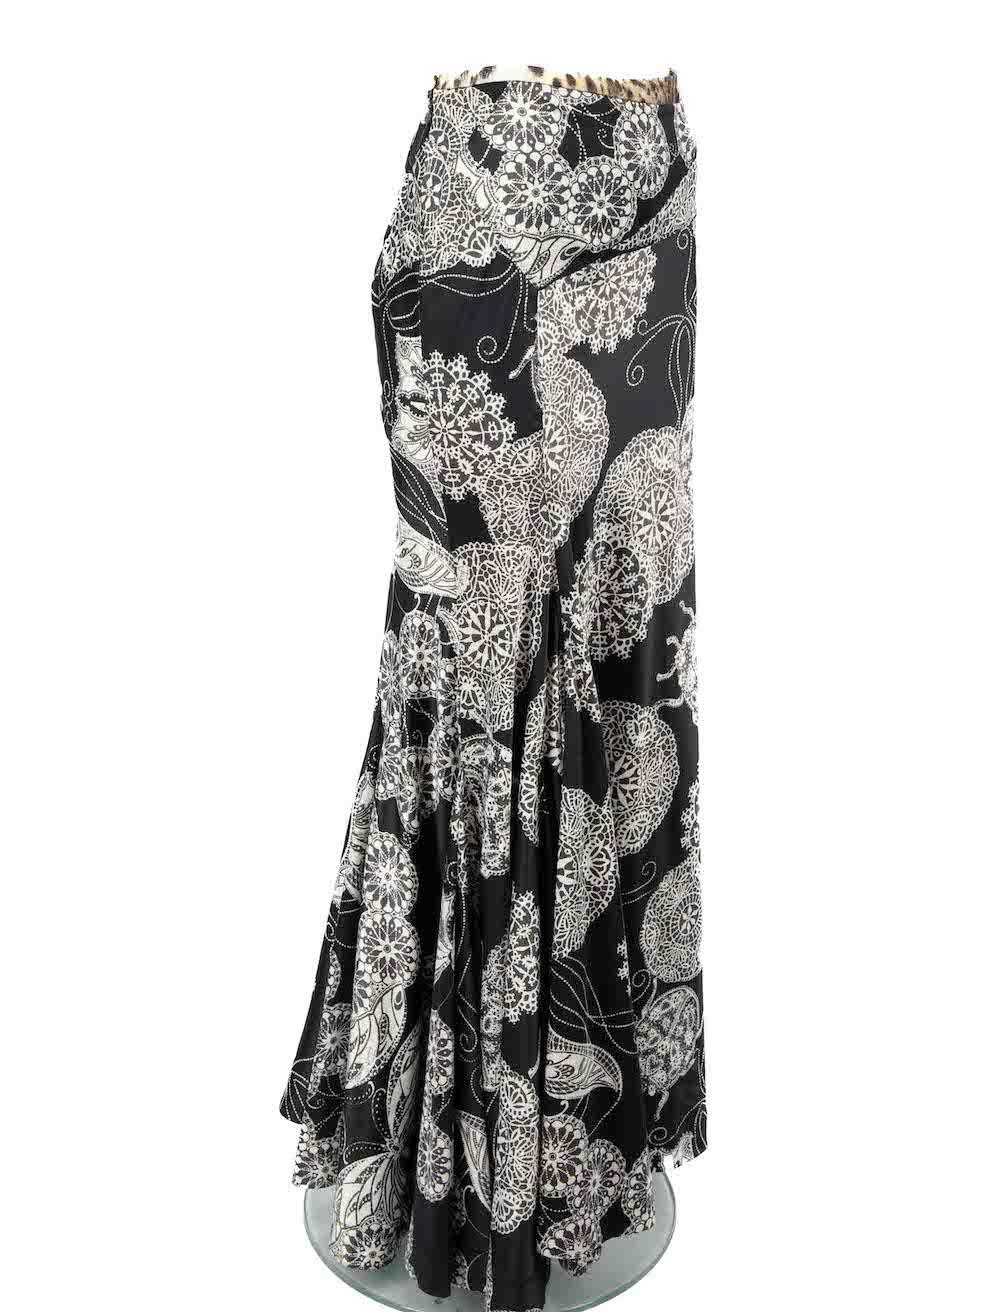 CONDITION is Very good. Minimal wear to skirt is evident. Minimal wear to the front and back with small pulls to the weave on this used Just Cavalli designer resale item.
 
 Details
 Black
 Polyester 
 Skirt 
 Maxi 
 Lace print
 Flared hem
 Back zip